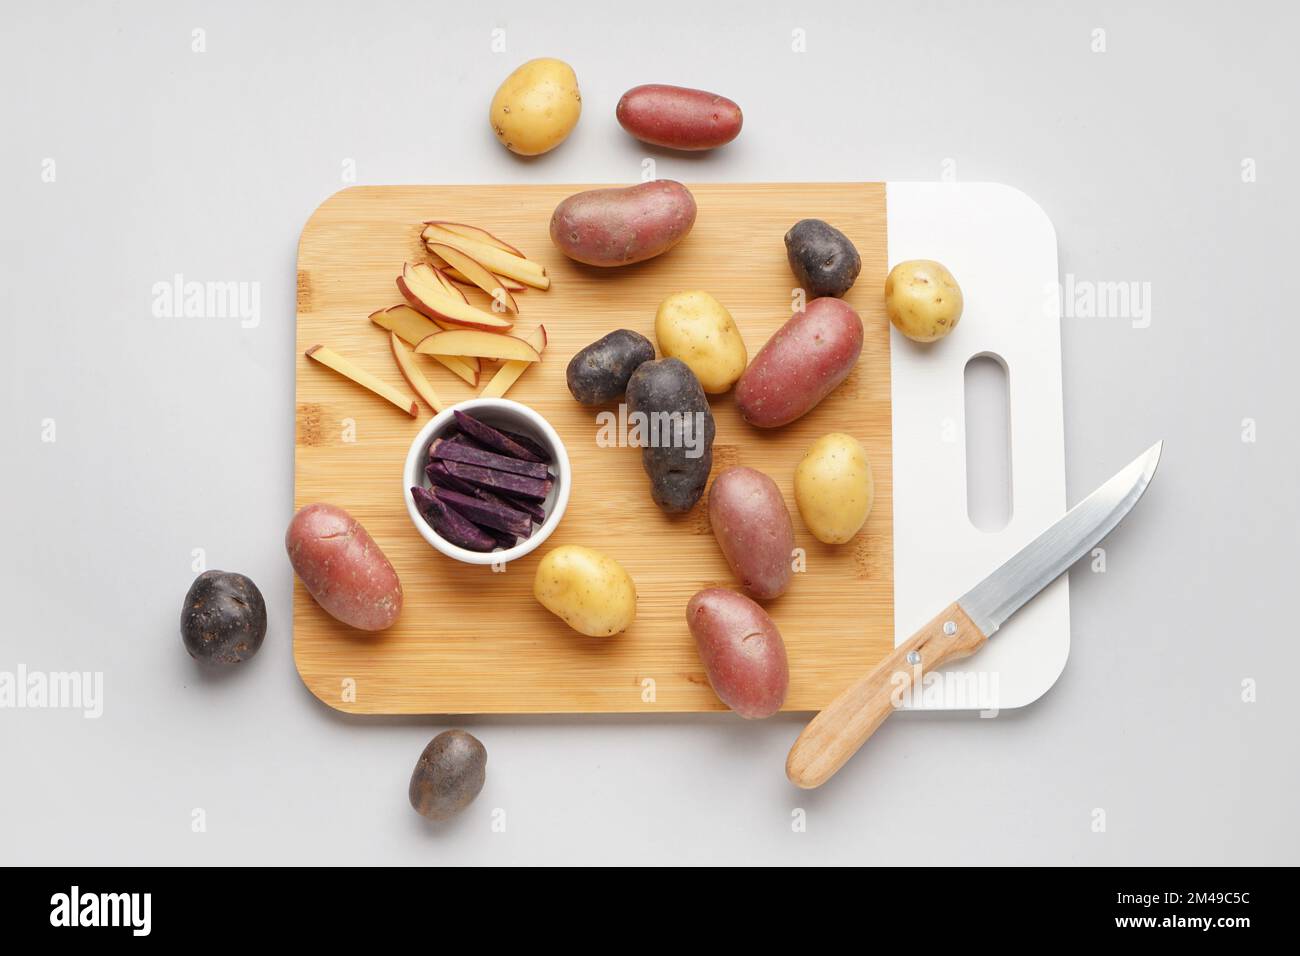 https://c8.alamy.com/comp/2M49C5C/wooden-board-with-different-raw-potatoes-and-knife-on-light-background-2M49C5C.jpg